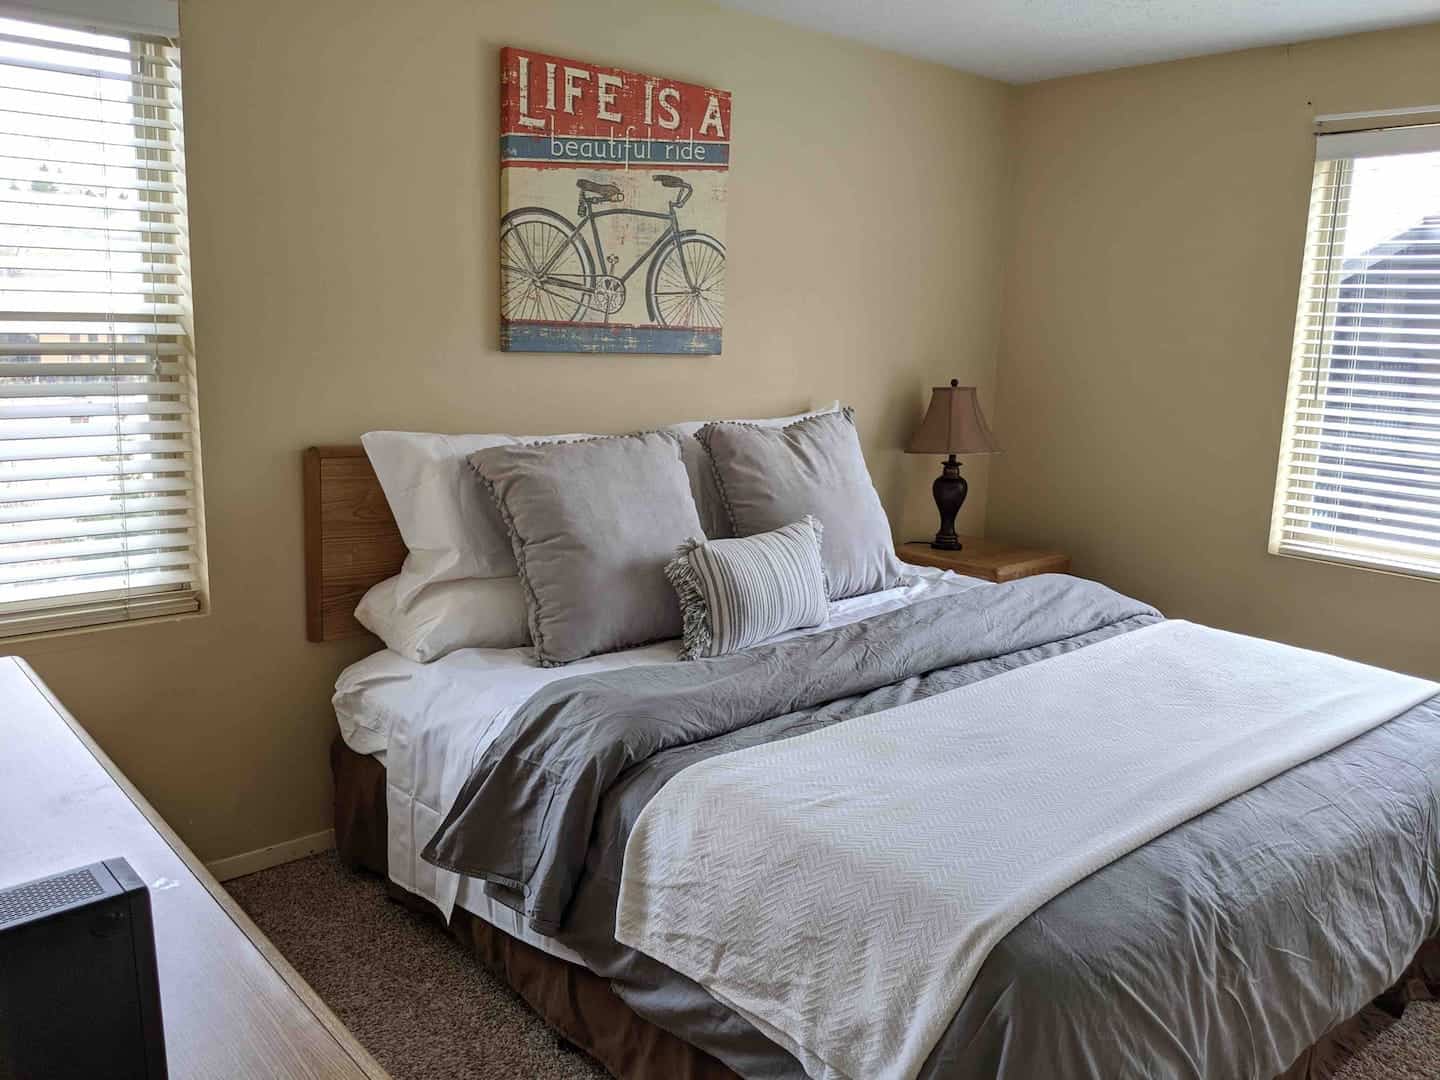 Image of Airbnb rental in Crested Butte, Colorado